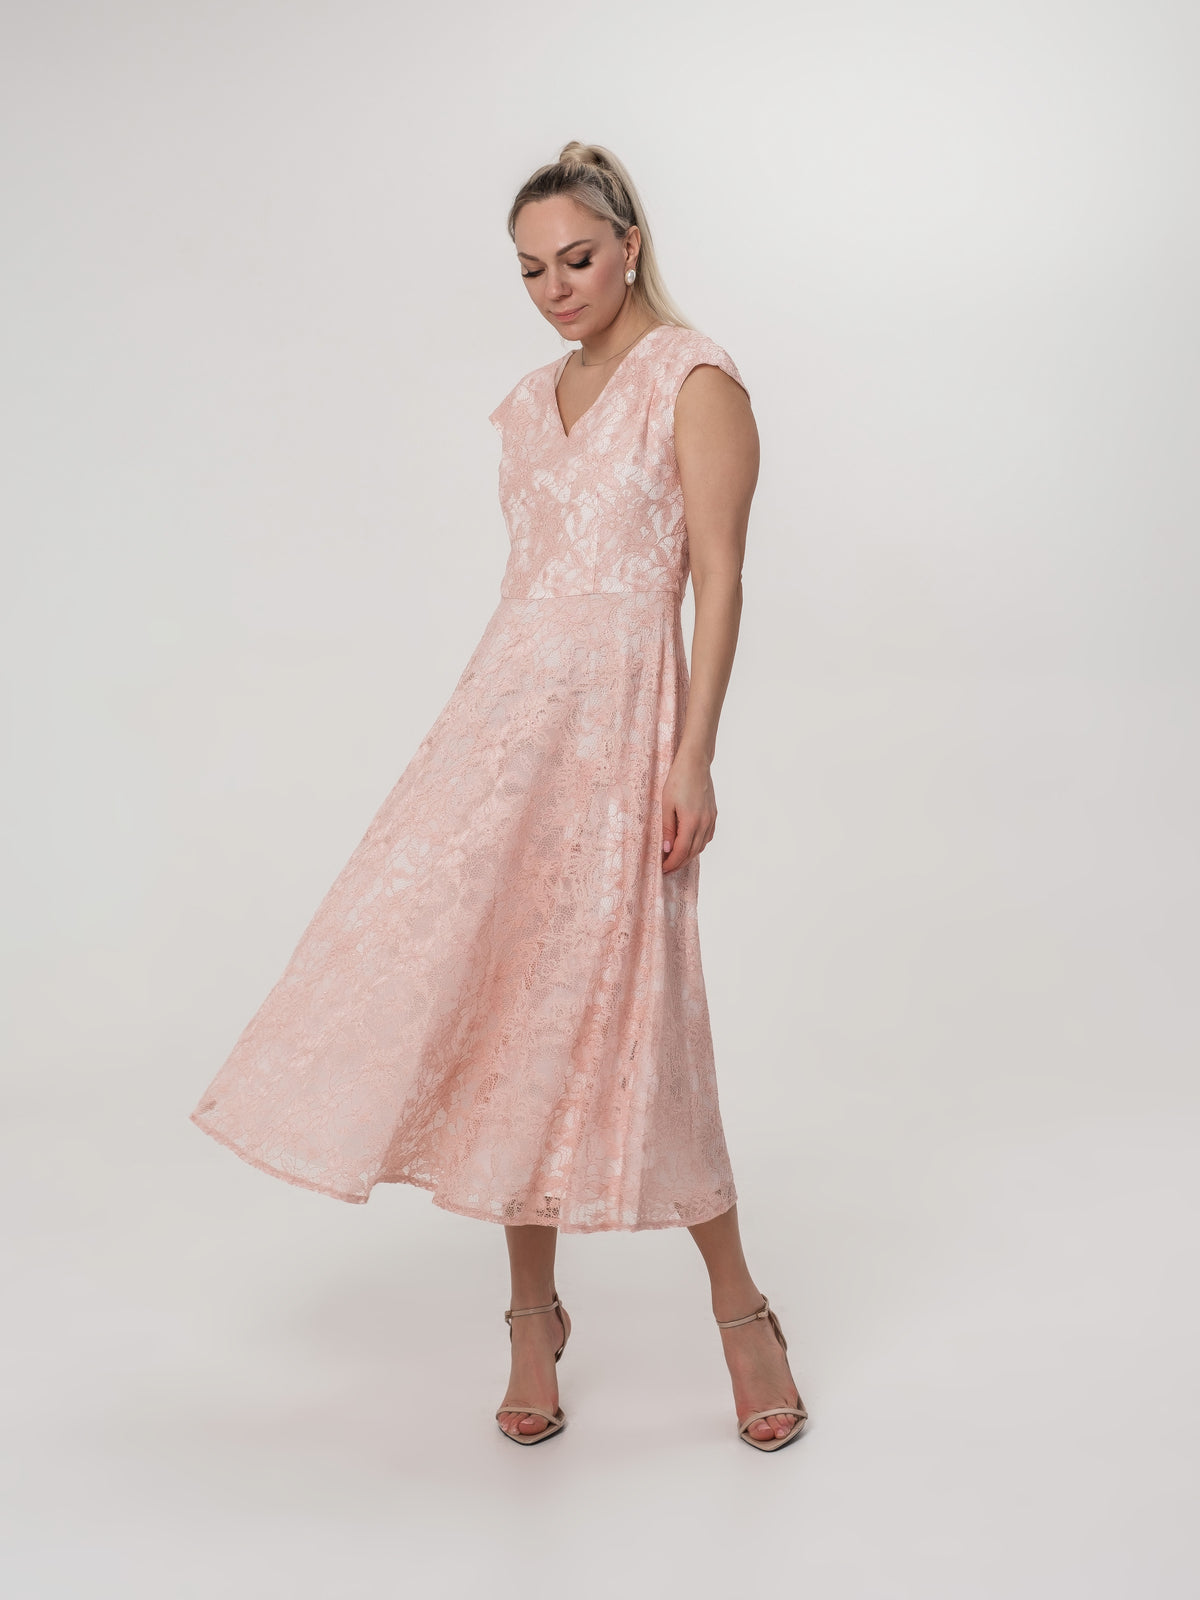 Soft pink lace dress with delicate sleeves and voluminous skirt